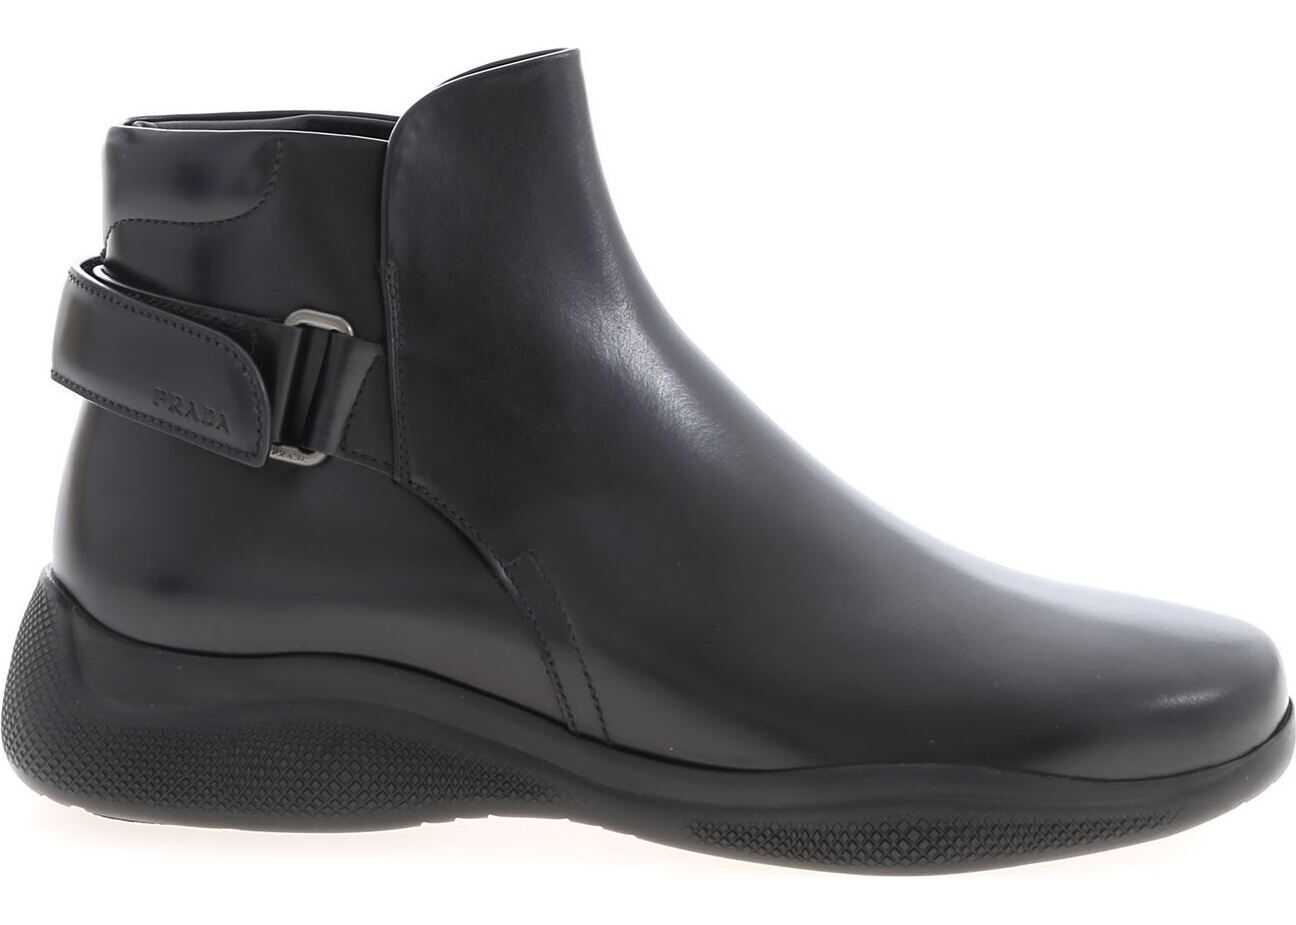 Prada Black Ankle Boots With Rear Strap* Black